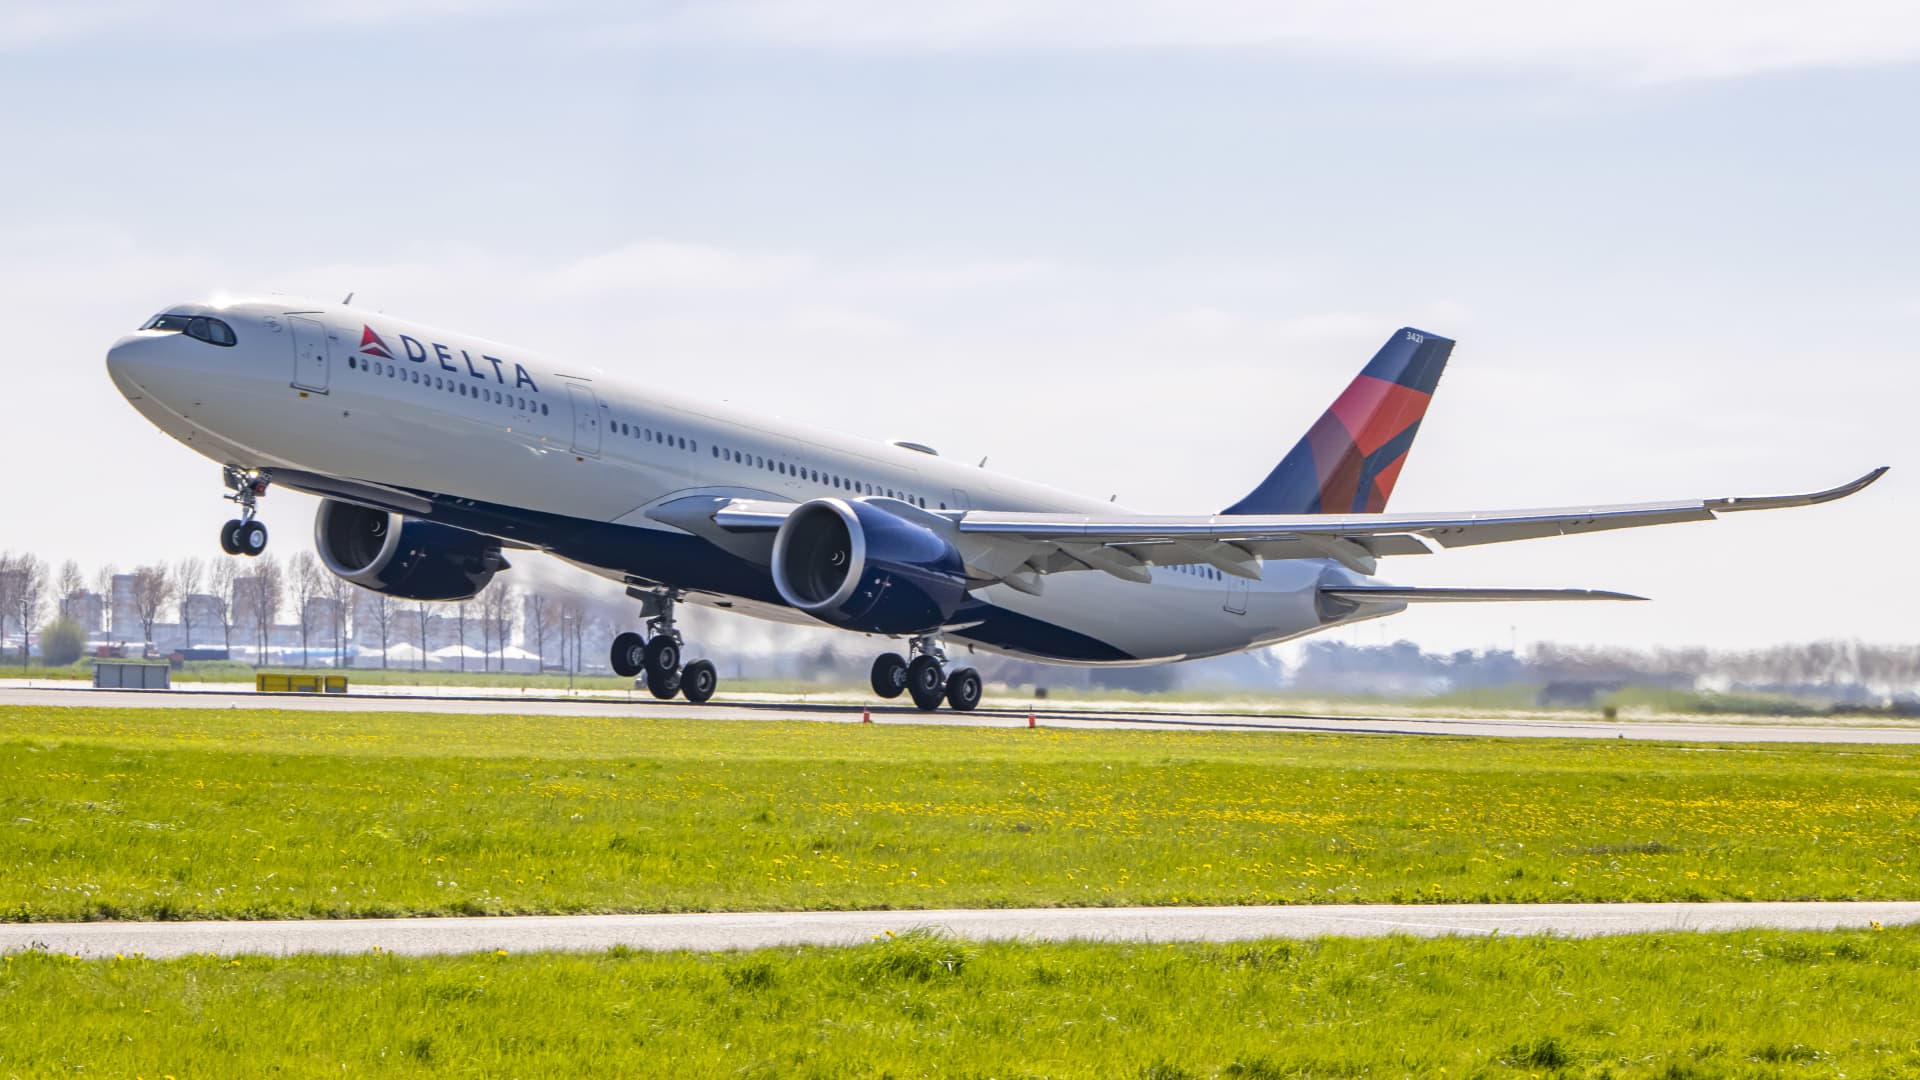 Delta is the No. 1 domestic airline for on-time arrivals, service, comfort and more